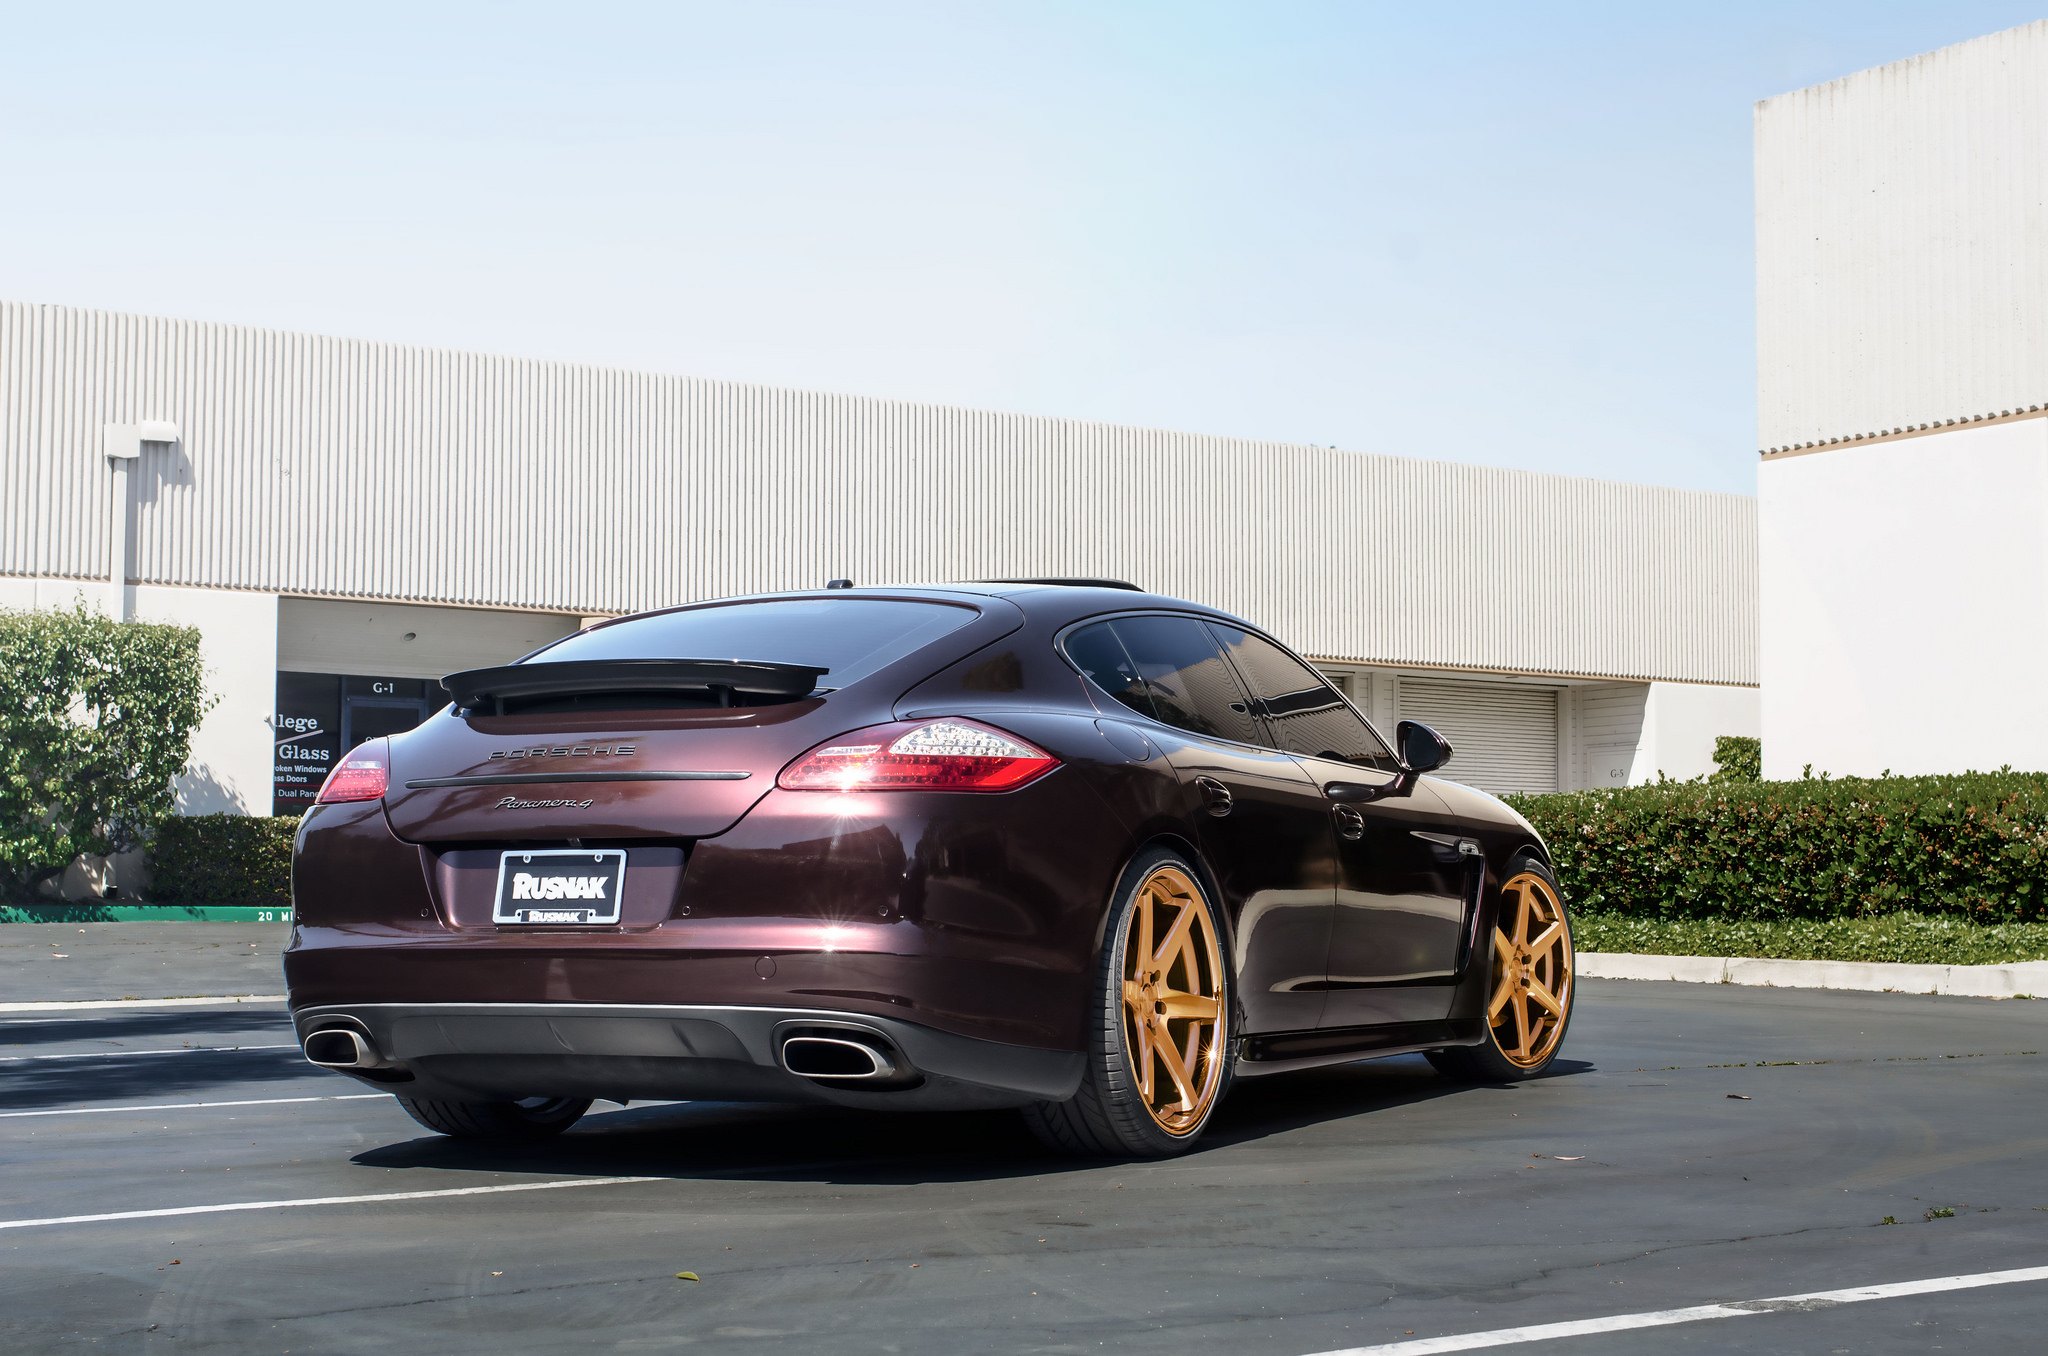 Custom Style Rear Spoiler on Red Porsche Panamera - Photo by Concept One